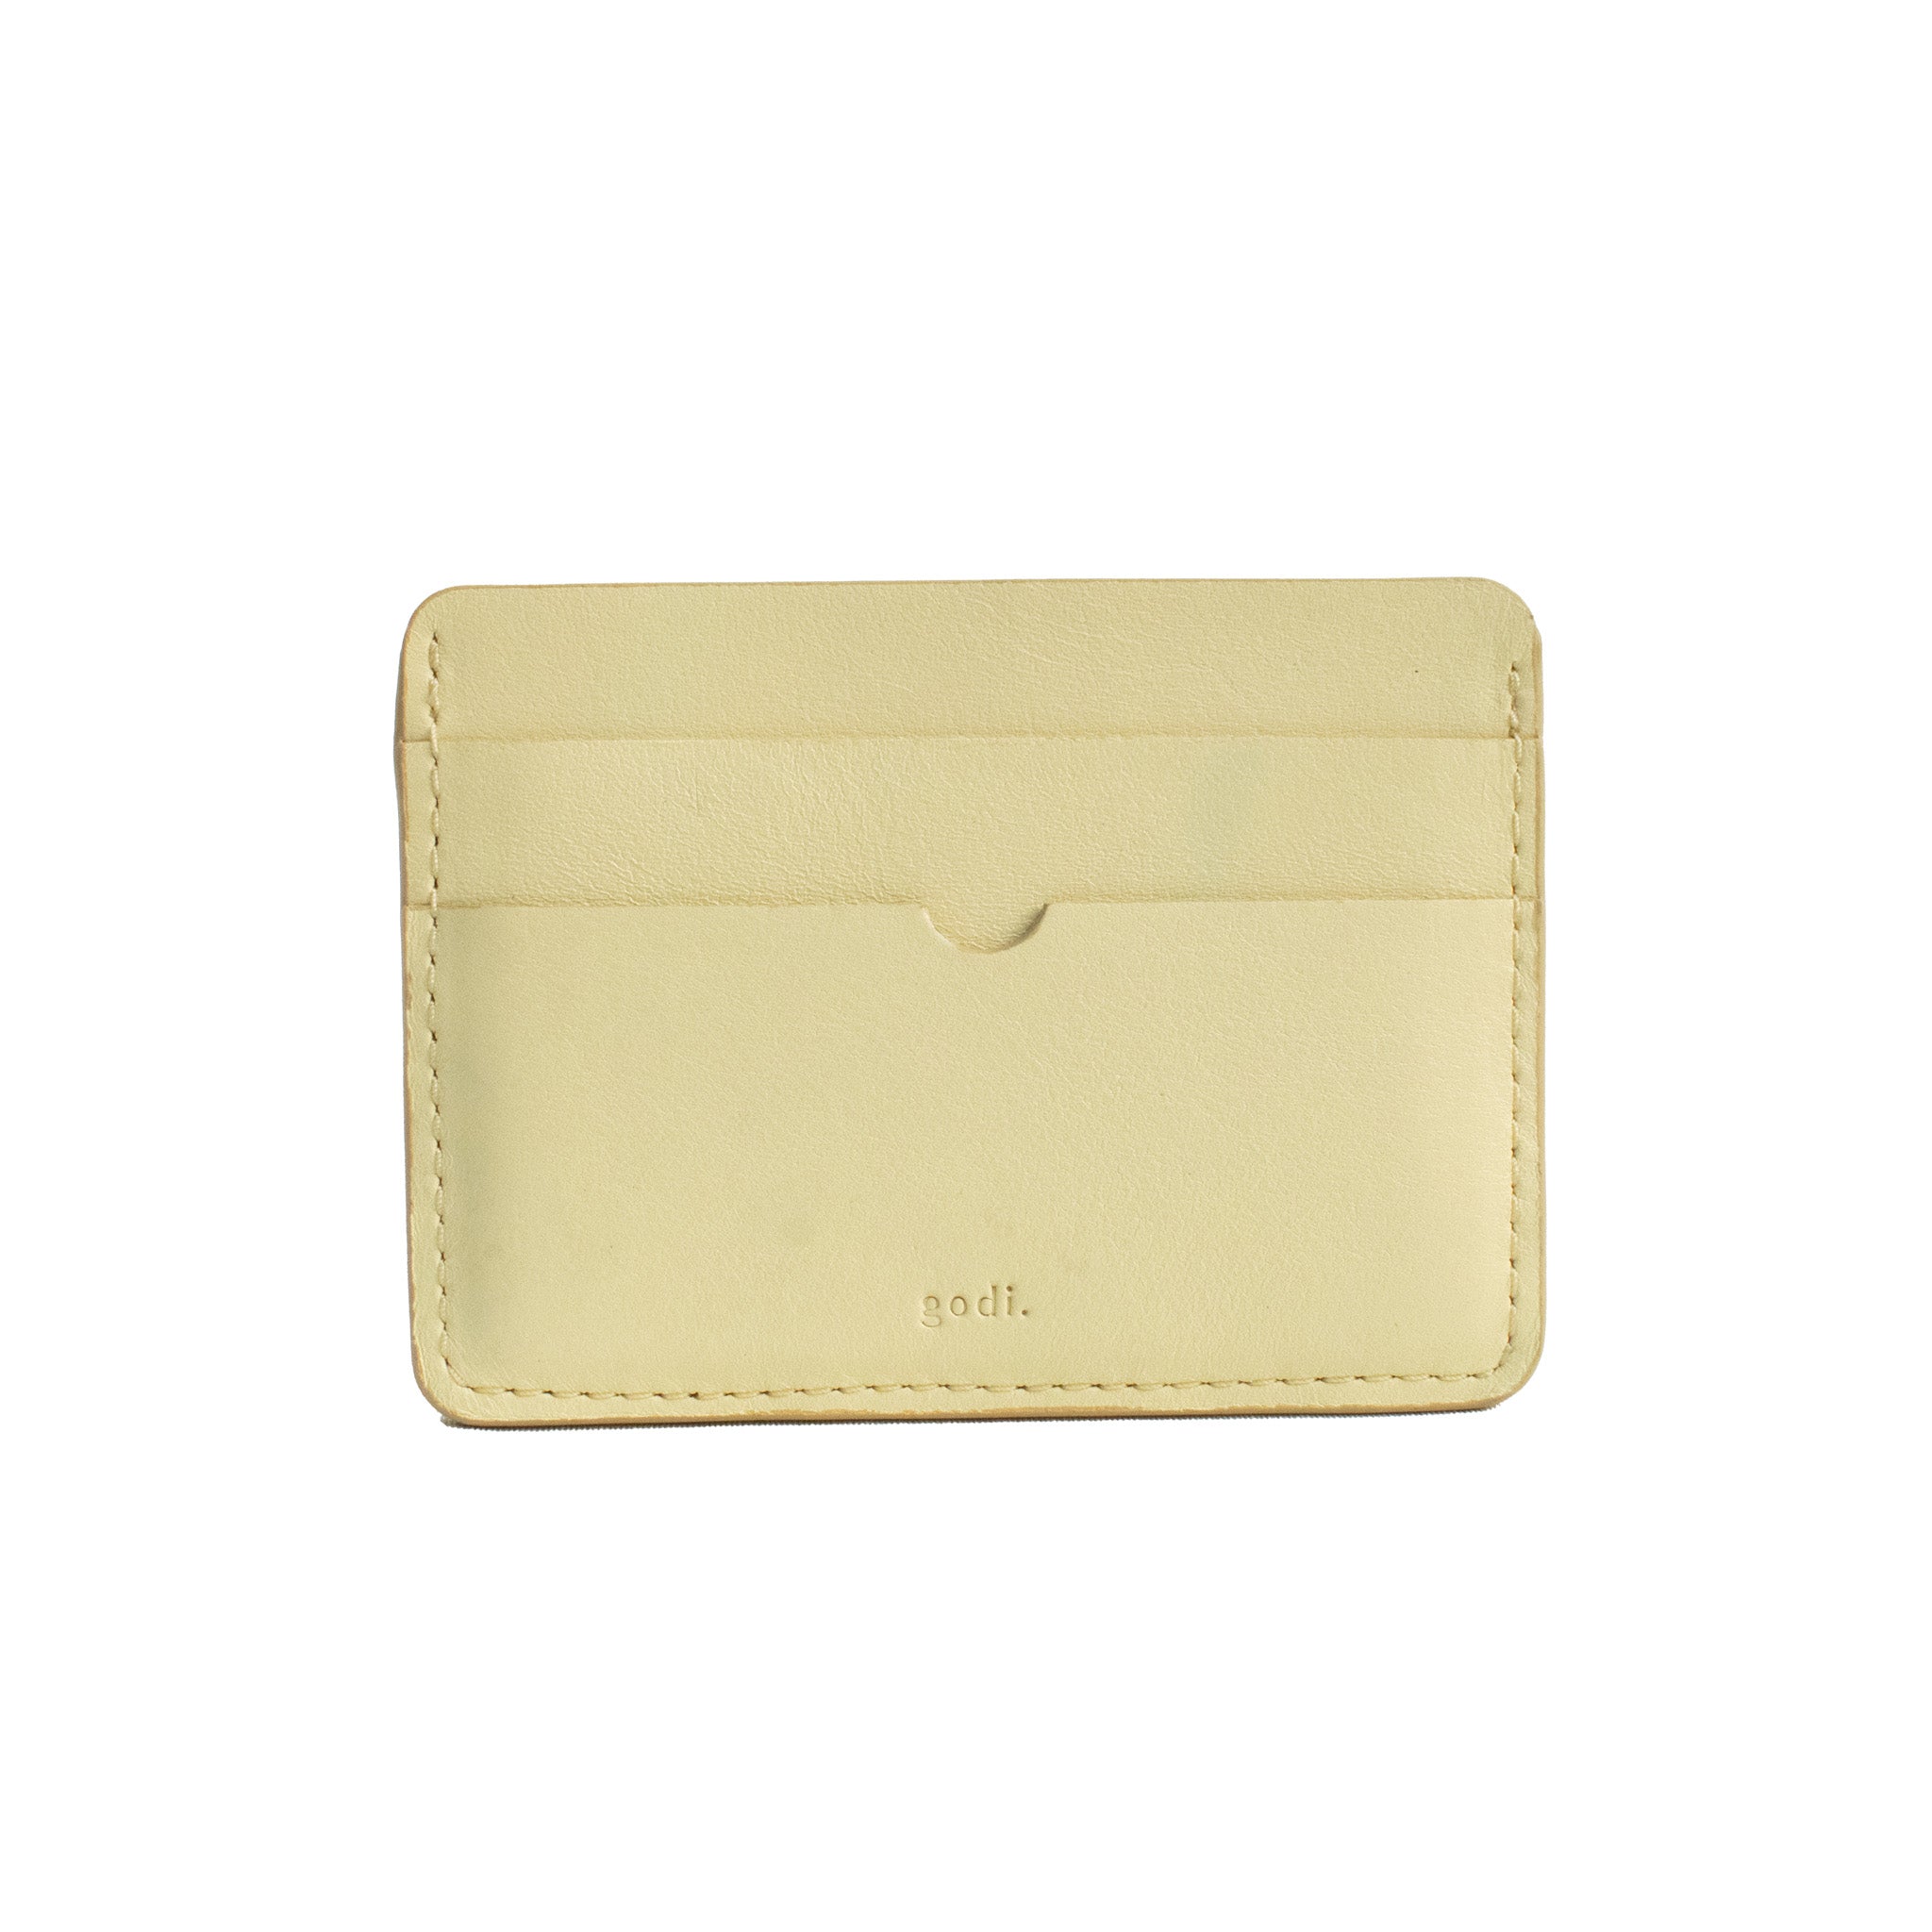 Card Case in French Vanilla